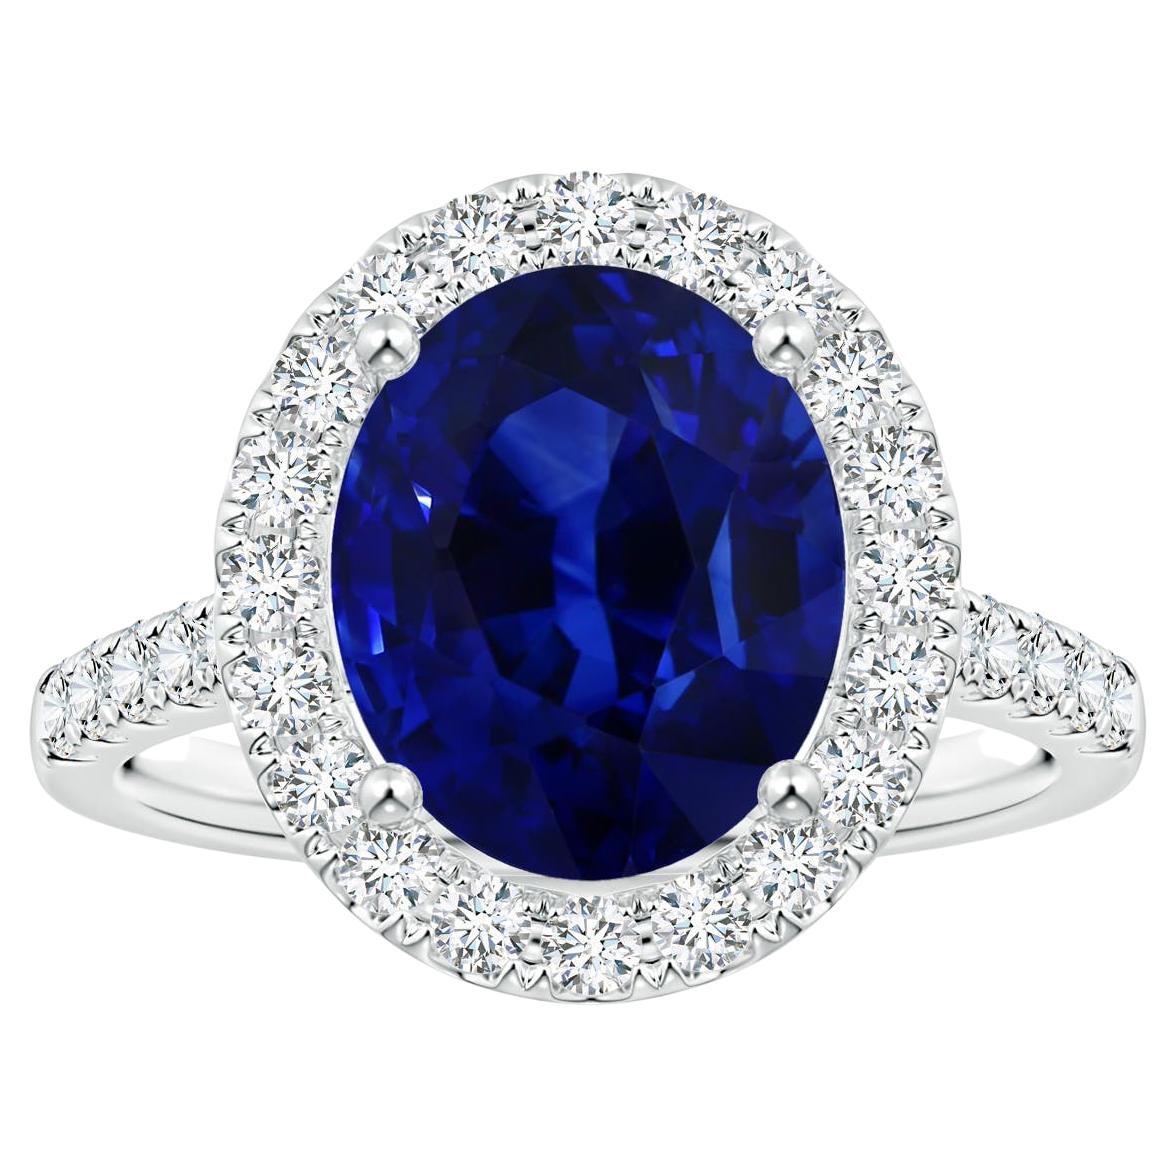 Angara Gia Certified Natural Blue Sapphire Halo Ring in White Gold with Diamonds